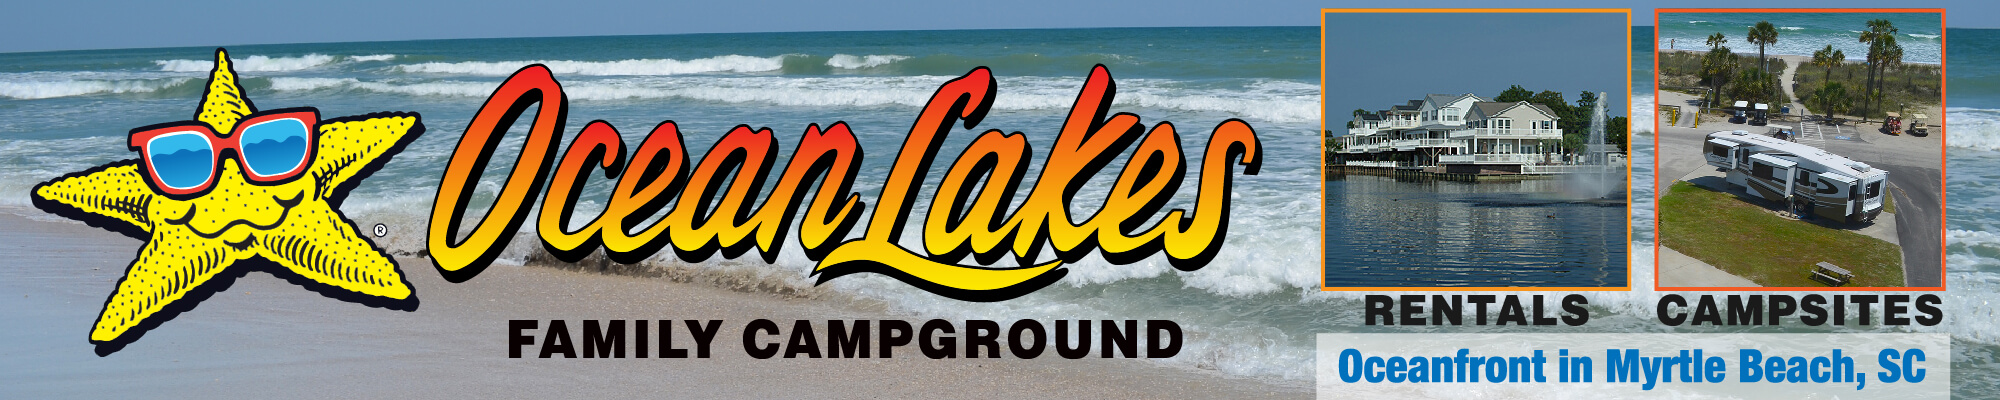 Ocean Lakes Family Campground banner ad